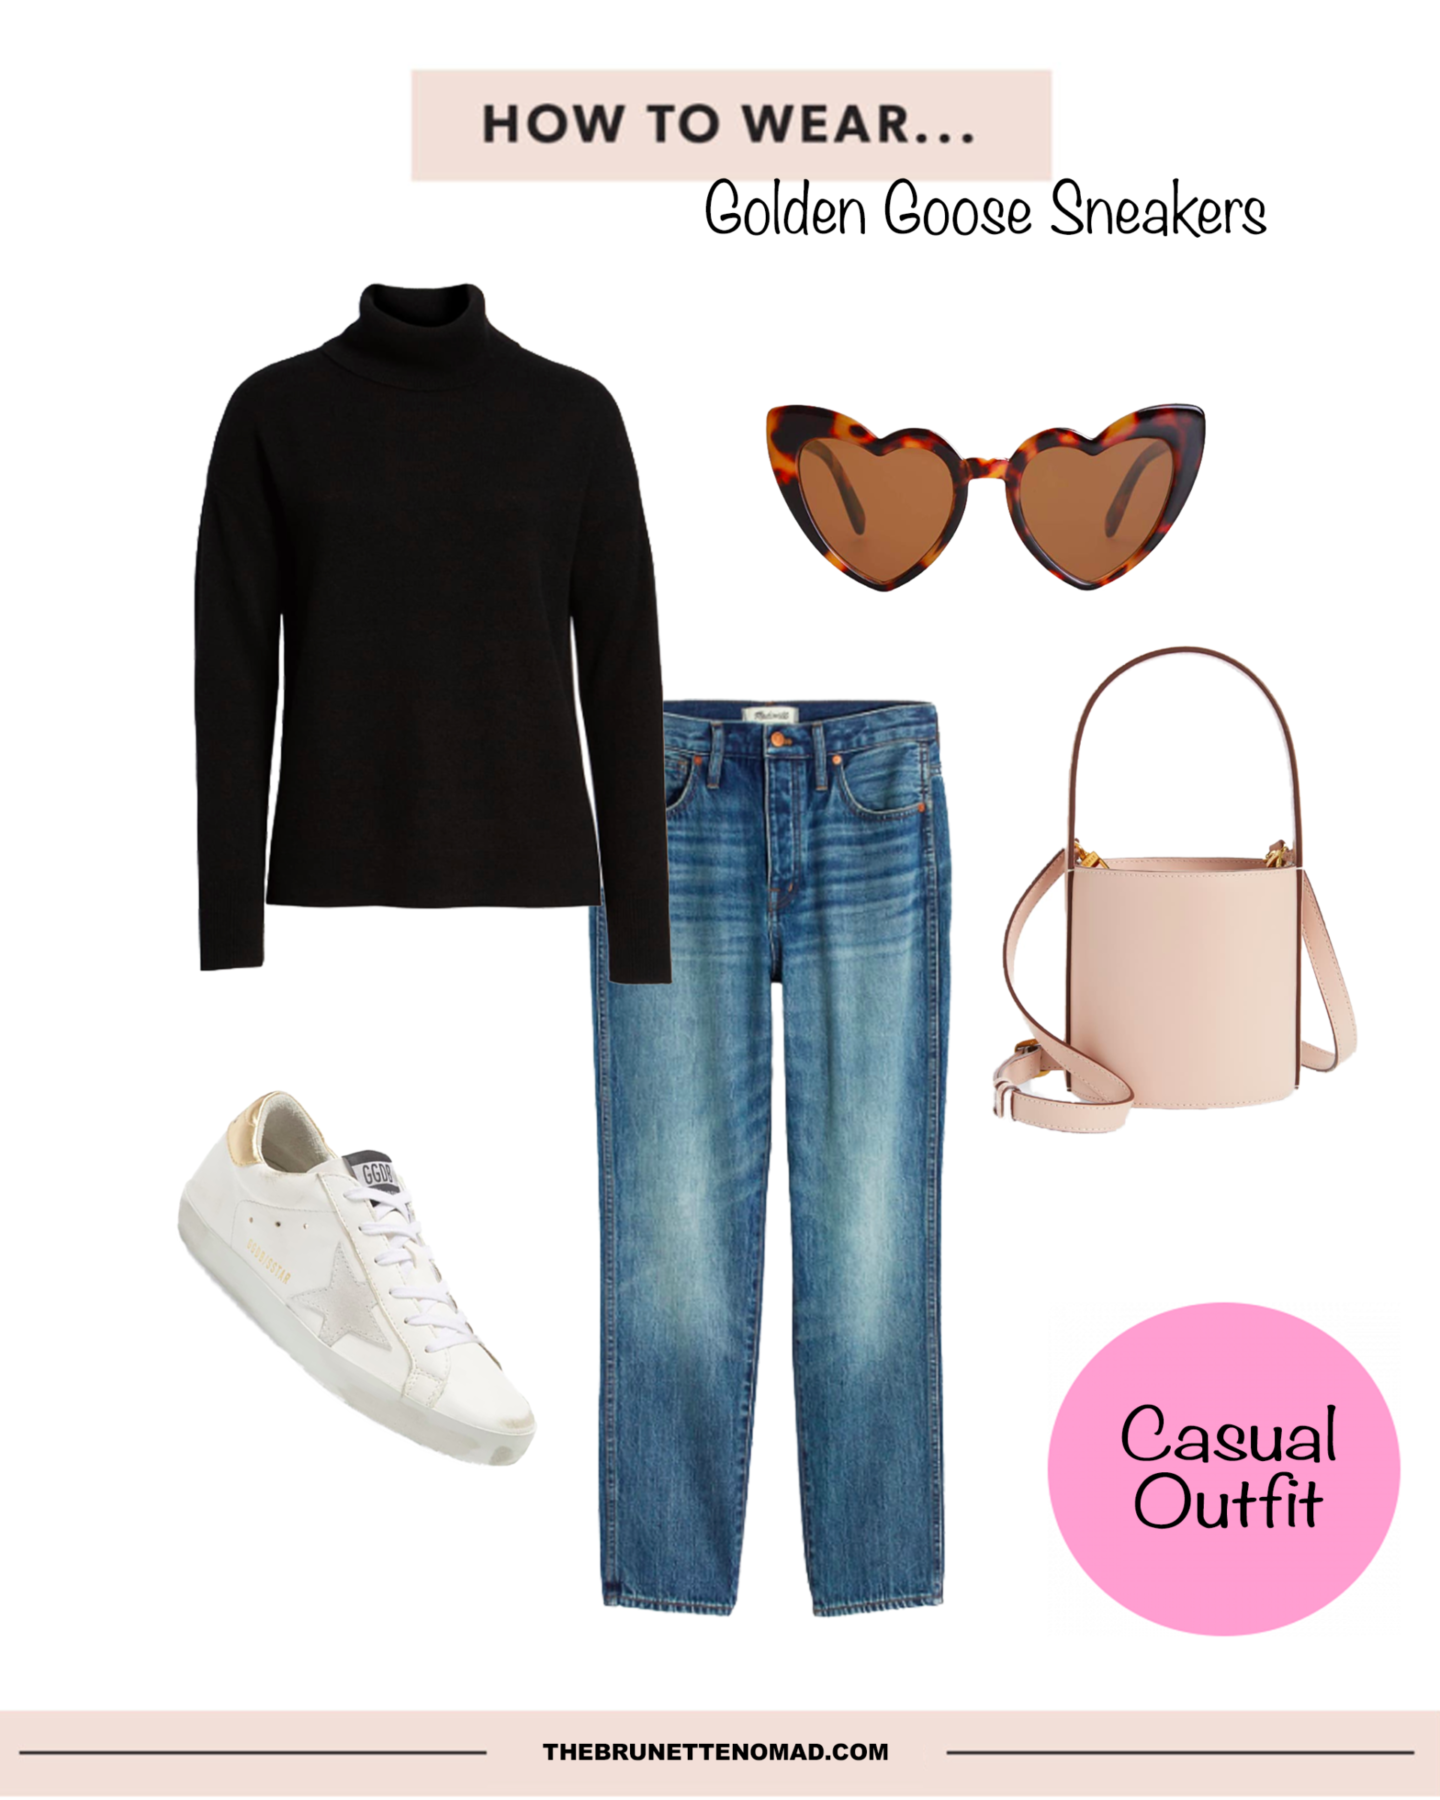 how to wear golden goose sneakers - casual outfit